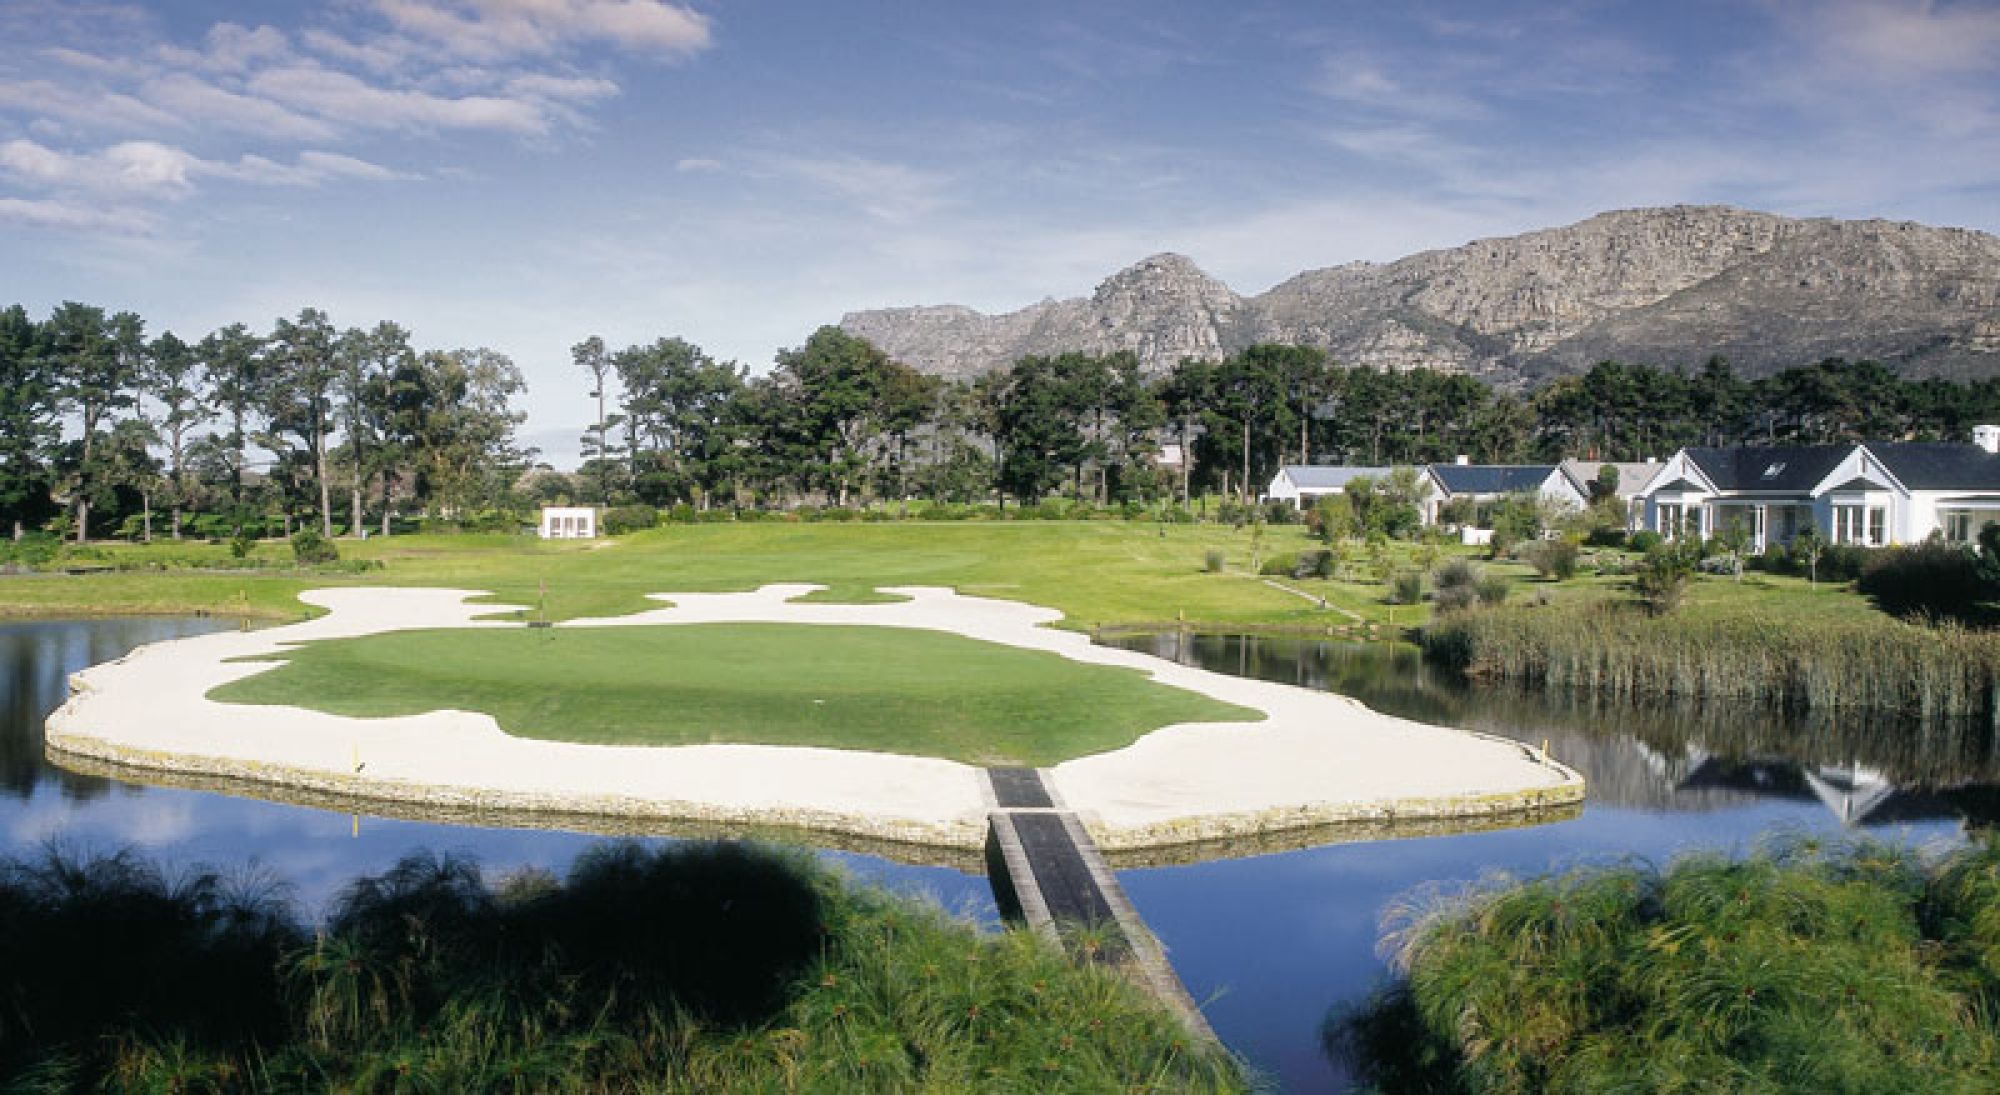 View Steenberg Golf Club's impressive golf course situated in incredible South Africa.